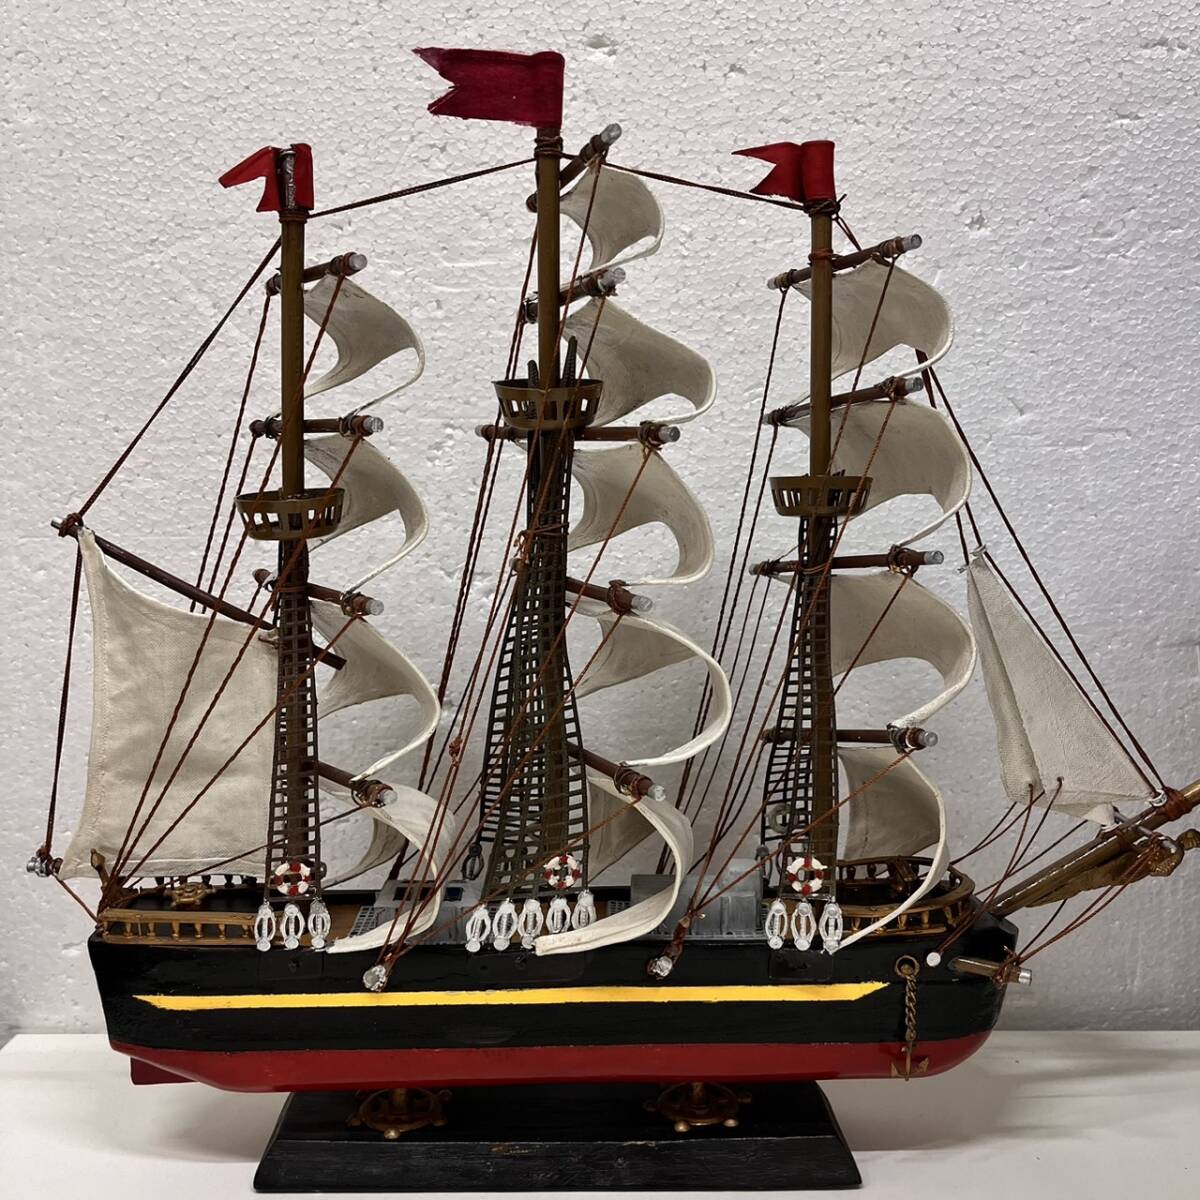 [C-25082]SEA WITCH 1846 year large sailing boat model sailing boat boat model wooden ornament interior decoration collection objet d'art collection 